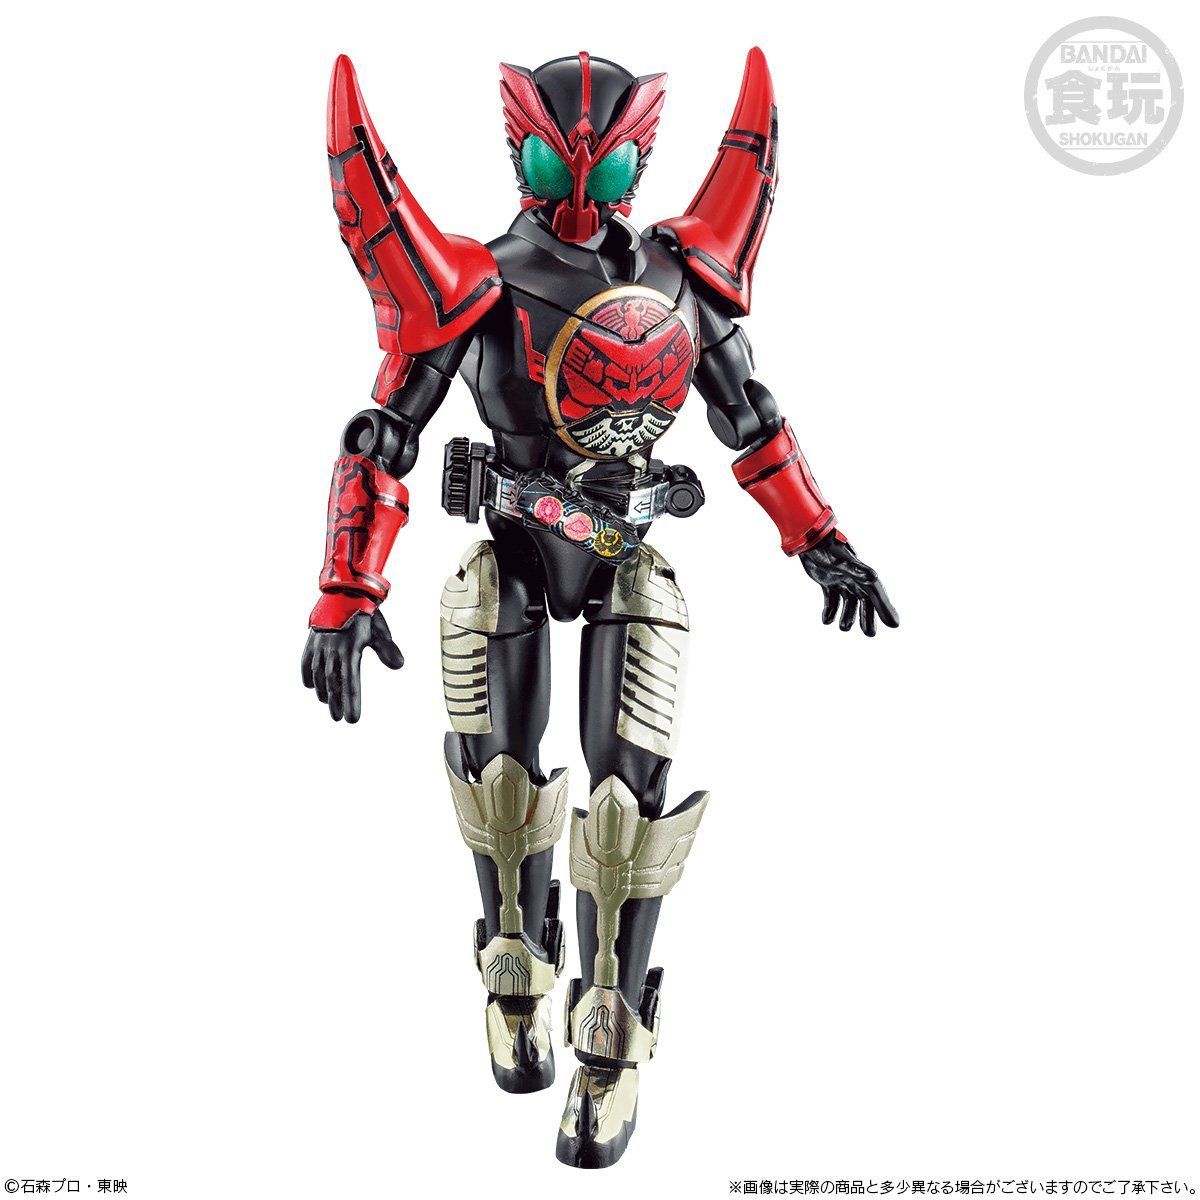 SO-DO CHRONICLE 層動 仮面ライダーオーズMOVIE SPECIAL SET【プレミアムバンダイ限定】| プレミアムバンダイ